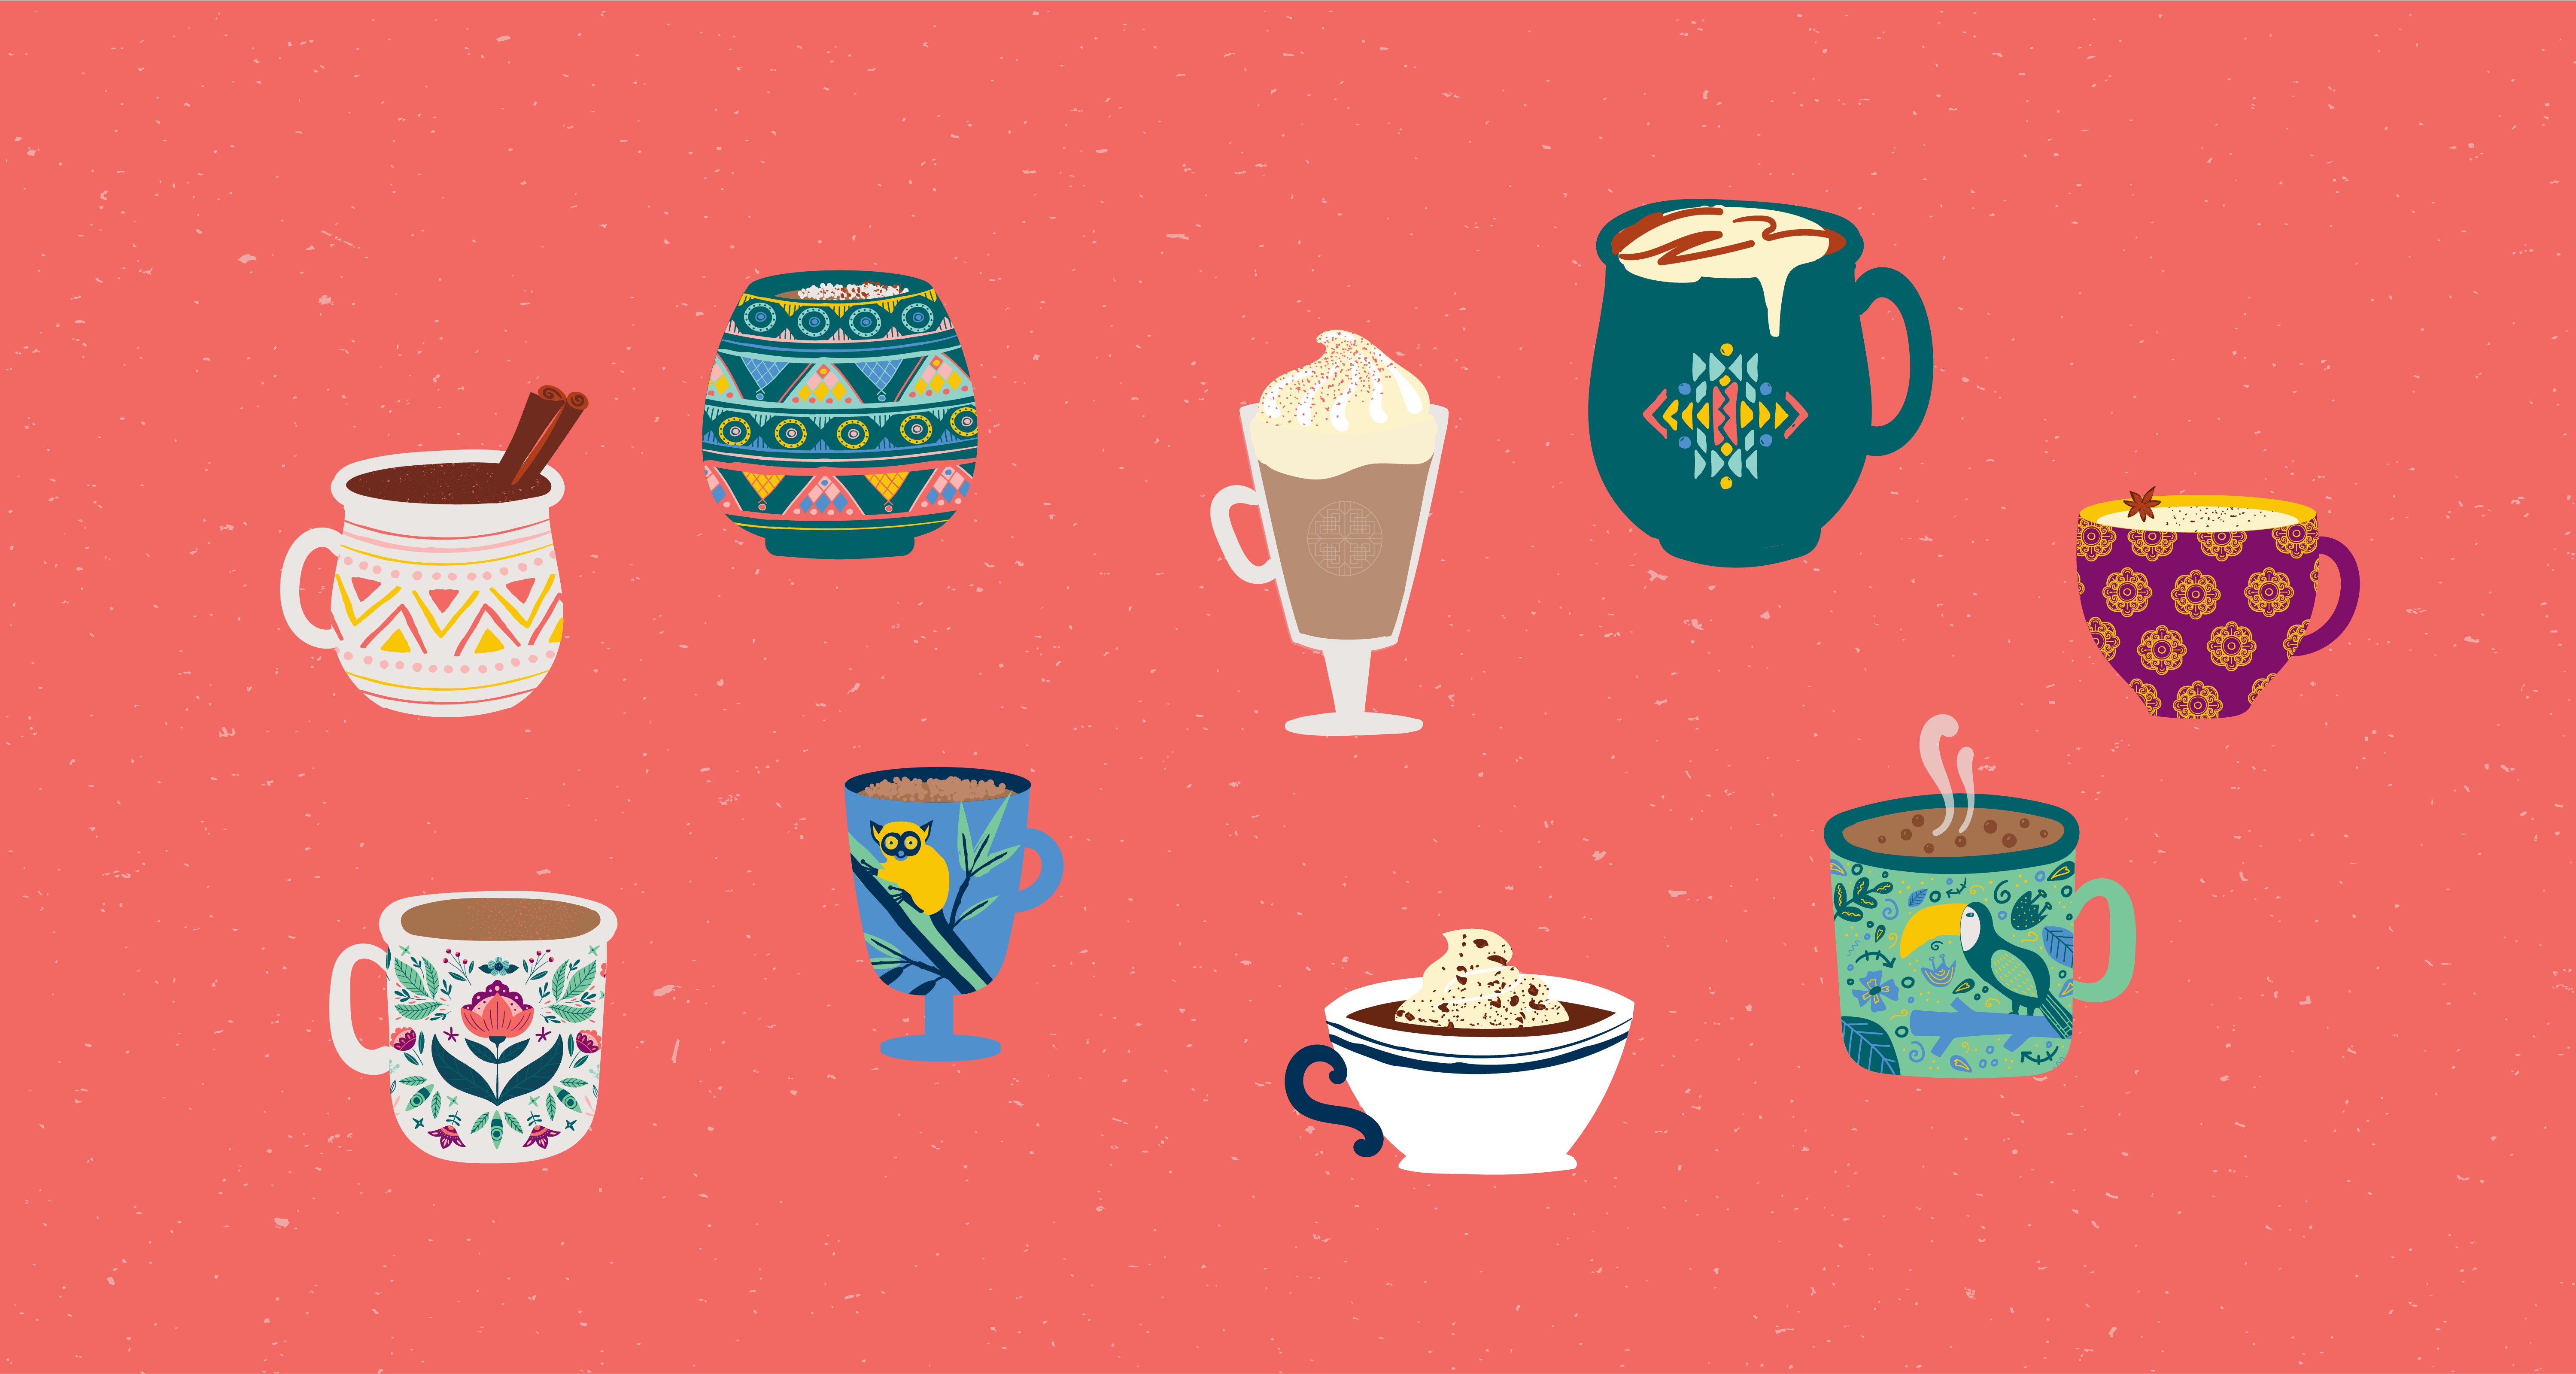 Heavenly Hot Chocolate Recipes From Around the World